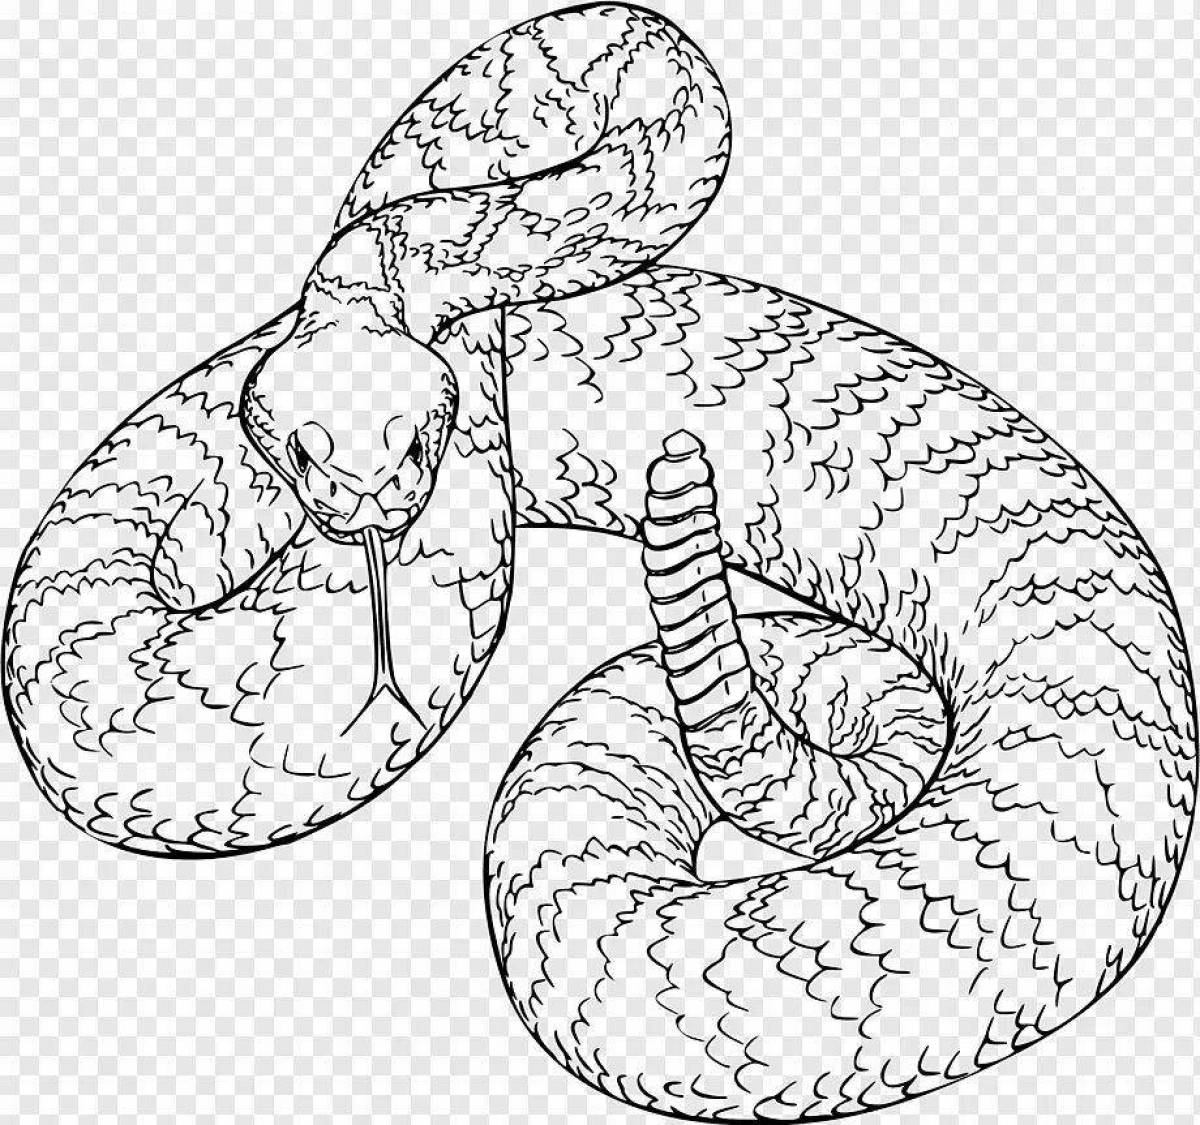 Coloring page striking steppe viper